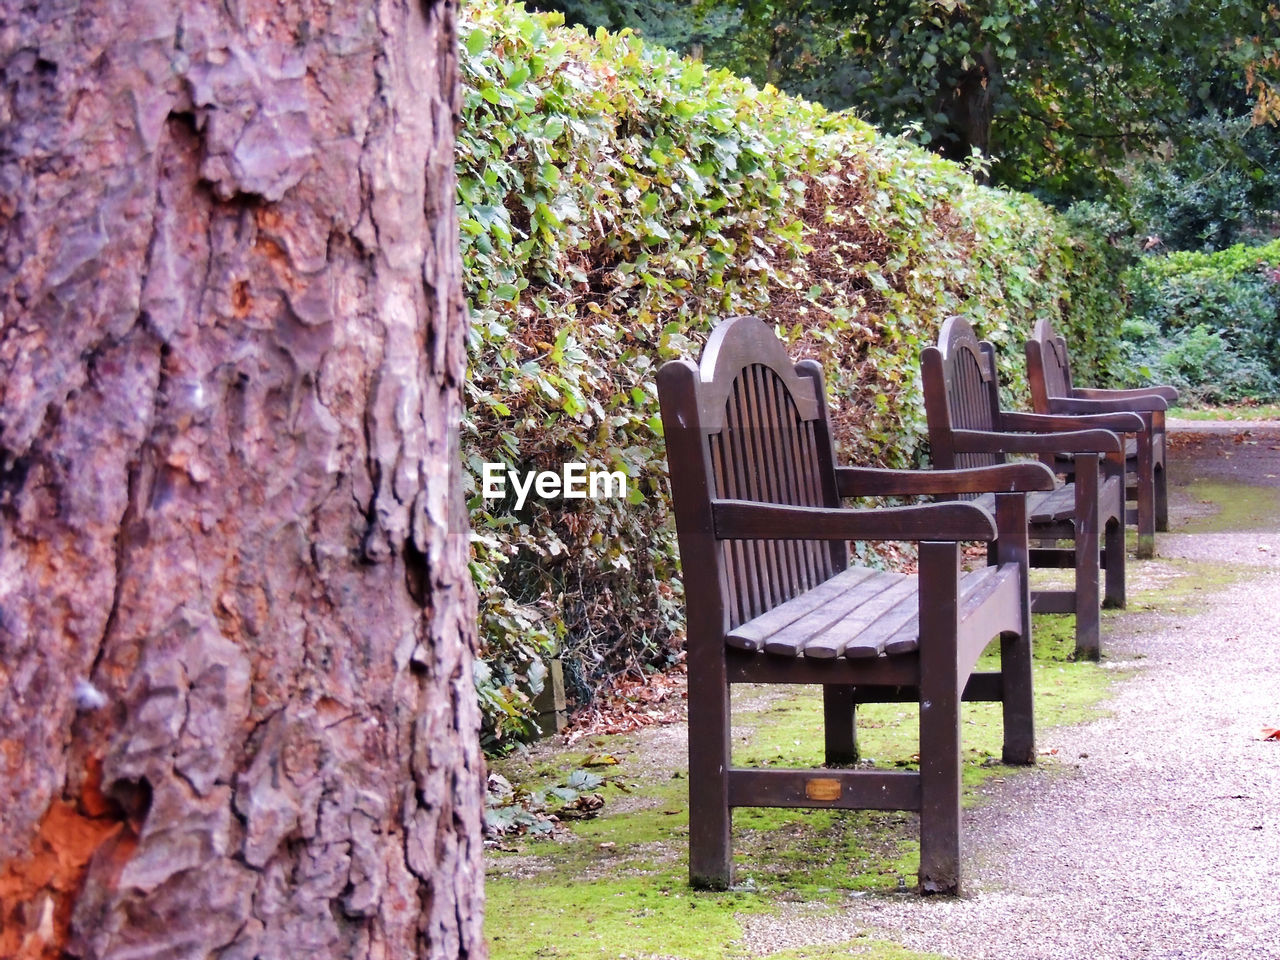 autumn mood Autumn Collection 3 In A Row 3 In A Row Hedge Chair Seat Plant Tree Nature No People Day Wood - Material Tree Trunk Trunk Empty Growth Absence Bench Outdoors Park Relaxation Beauty In Nature Solid